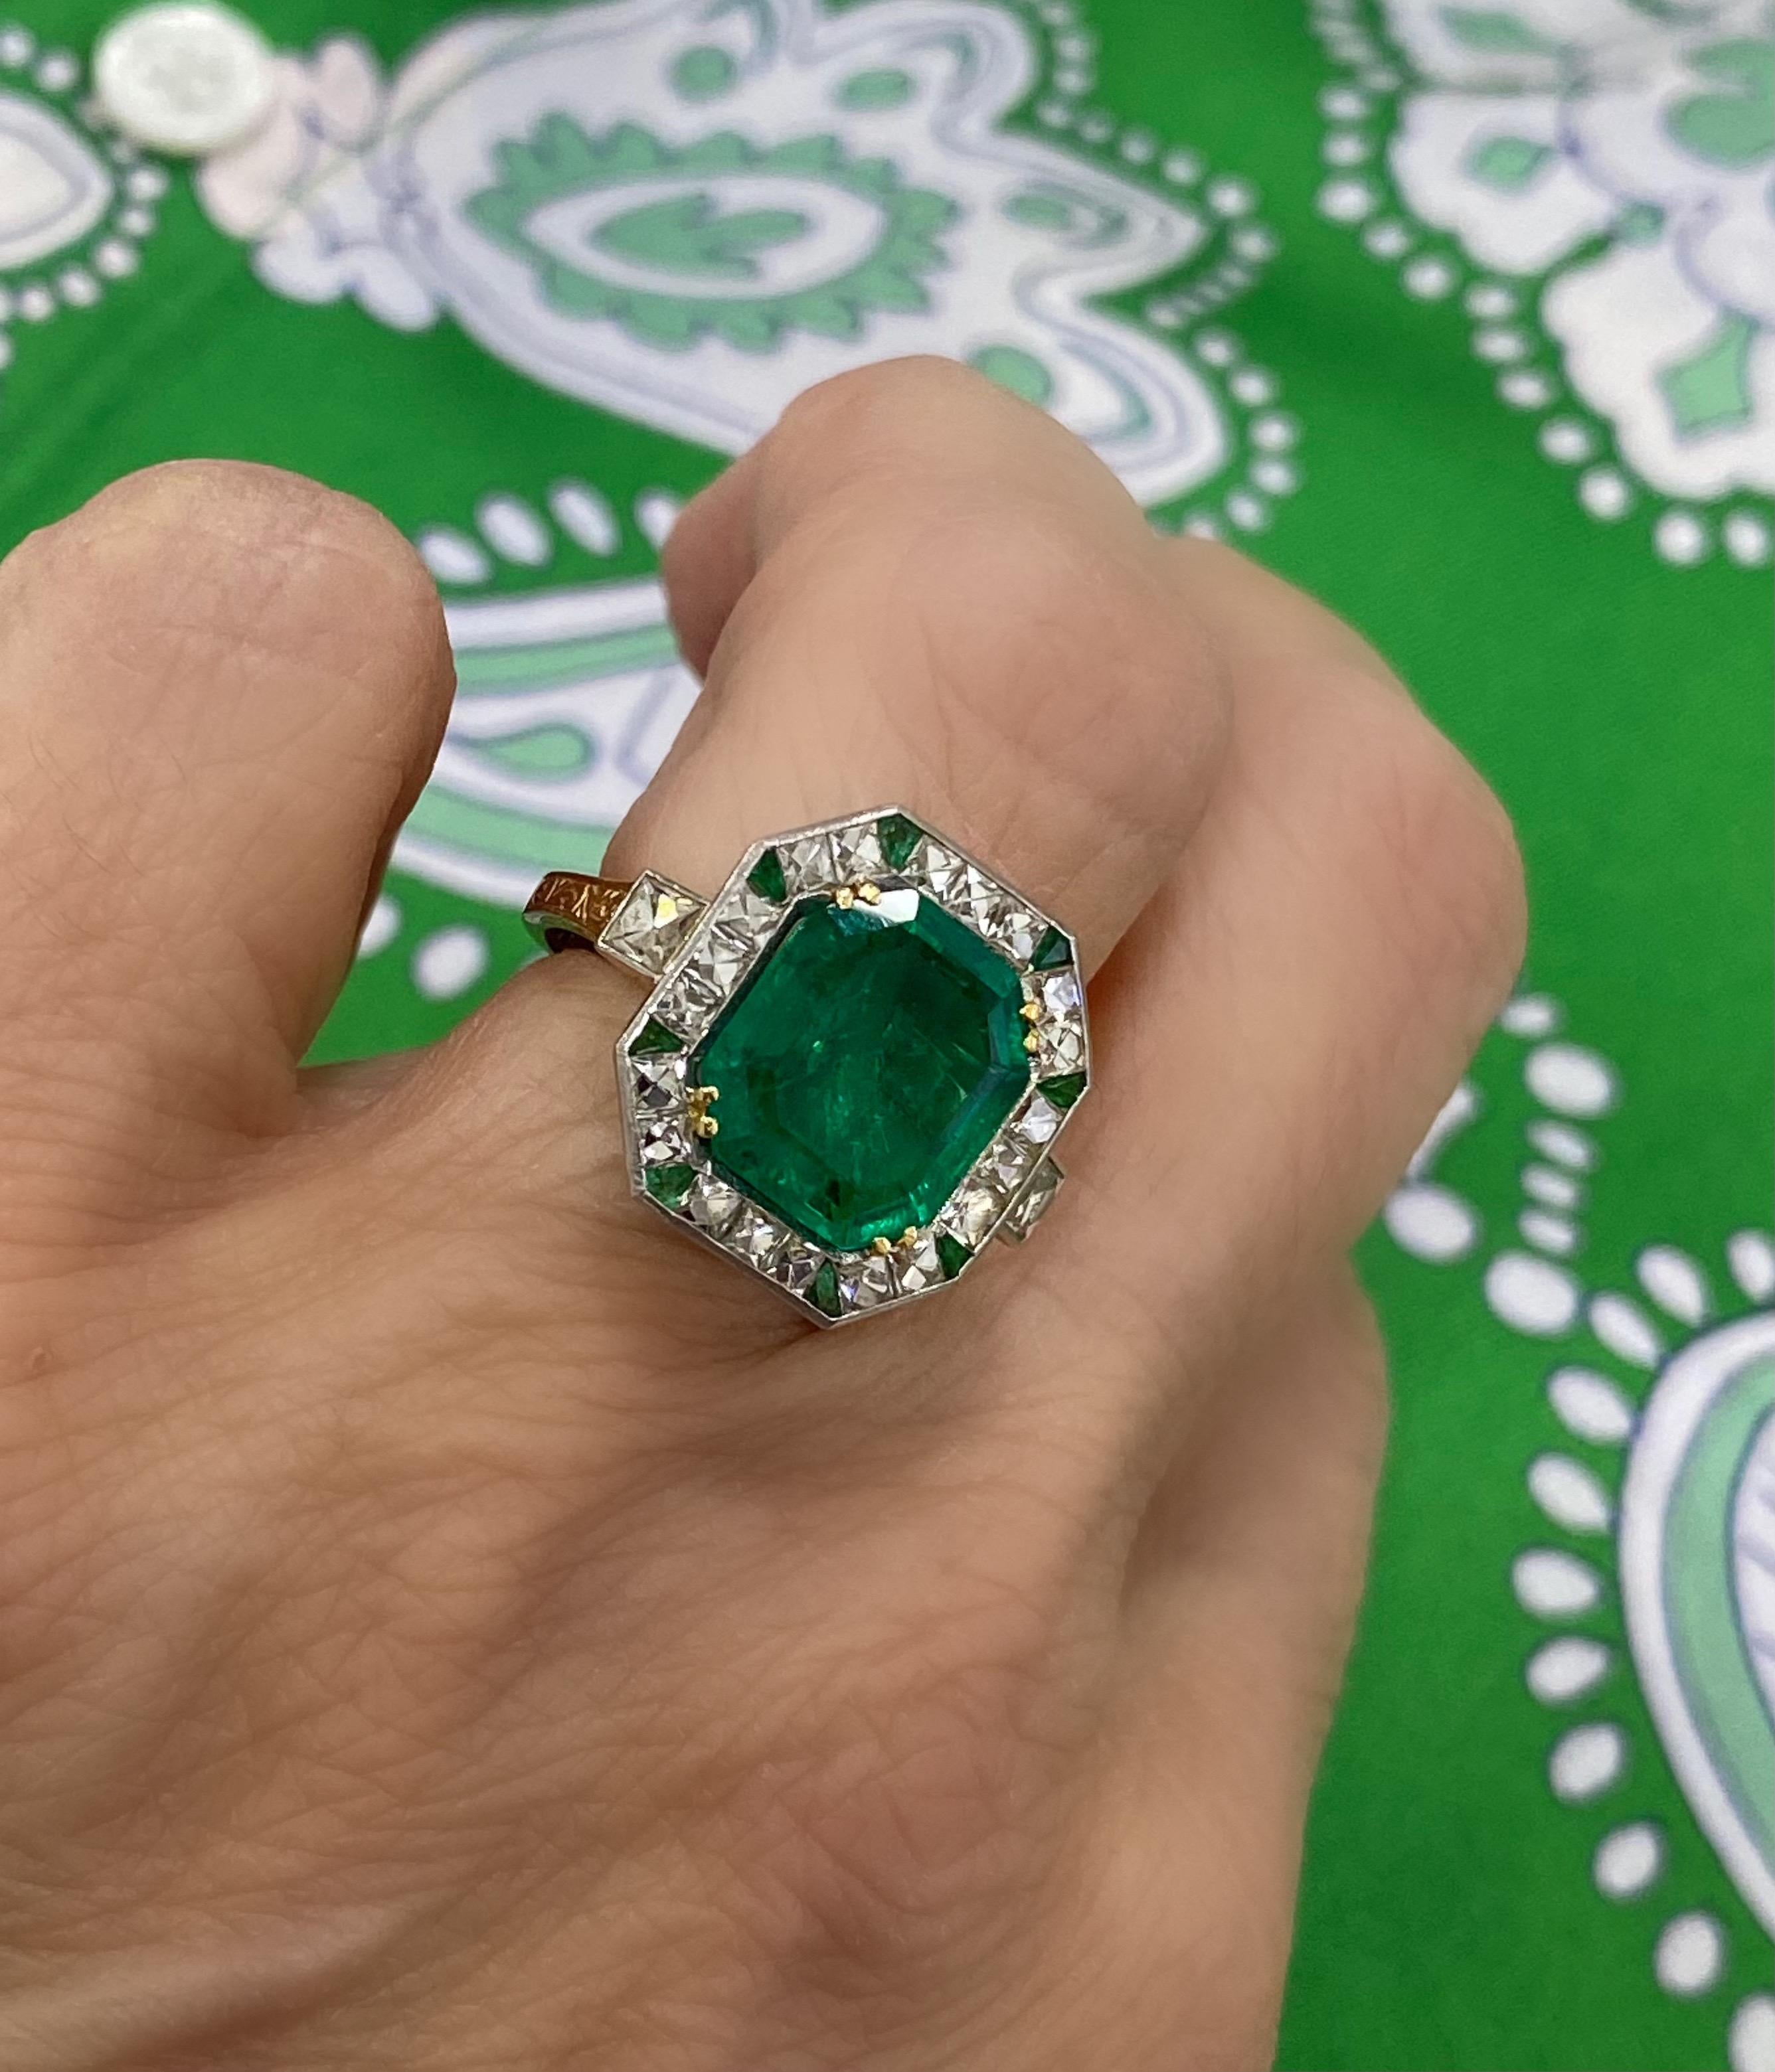 This is an incredible example of Circa 1920s Art Deco design and style at its best! This handmade 18k gold and platinum top ring features a natural emerald cut 3.60 carat Colombian Emerald (11.16x9.90x4.56), with the GAL report attached. This